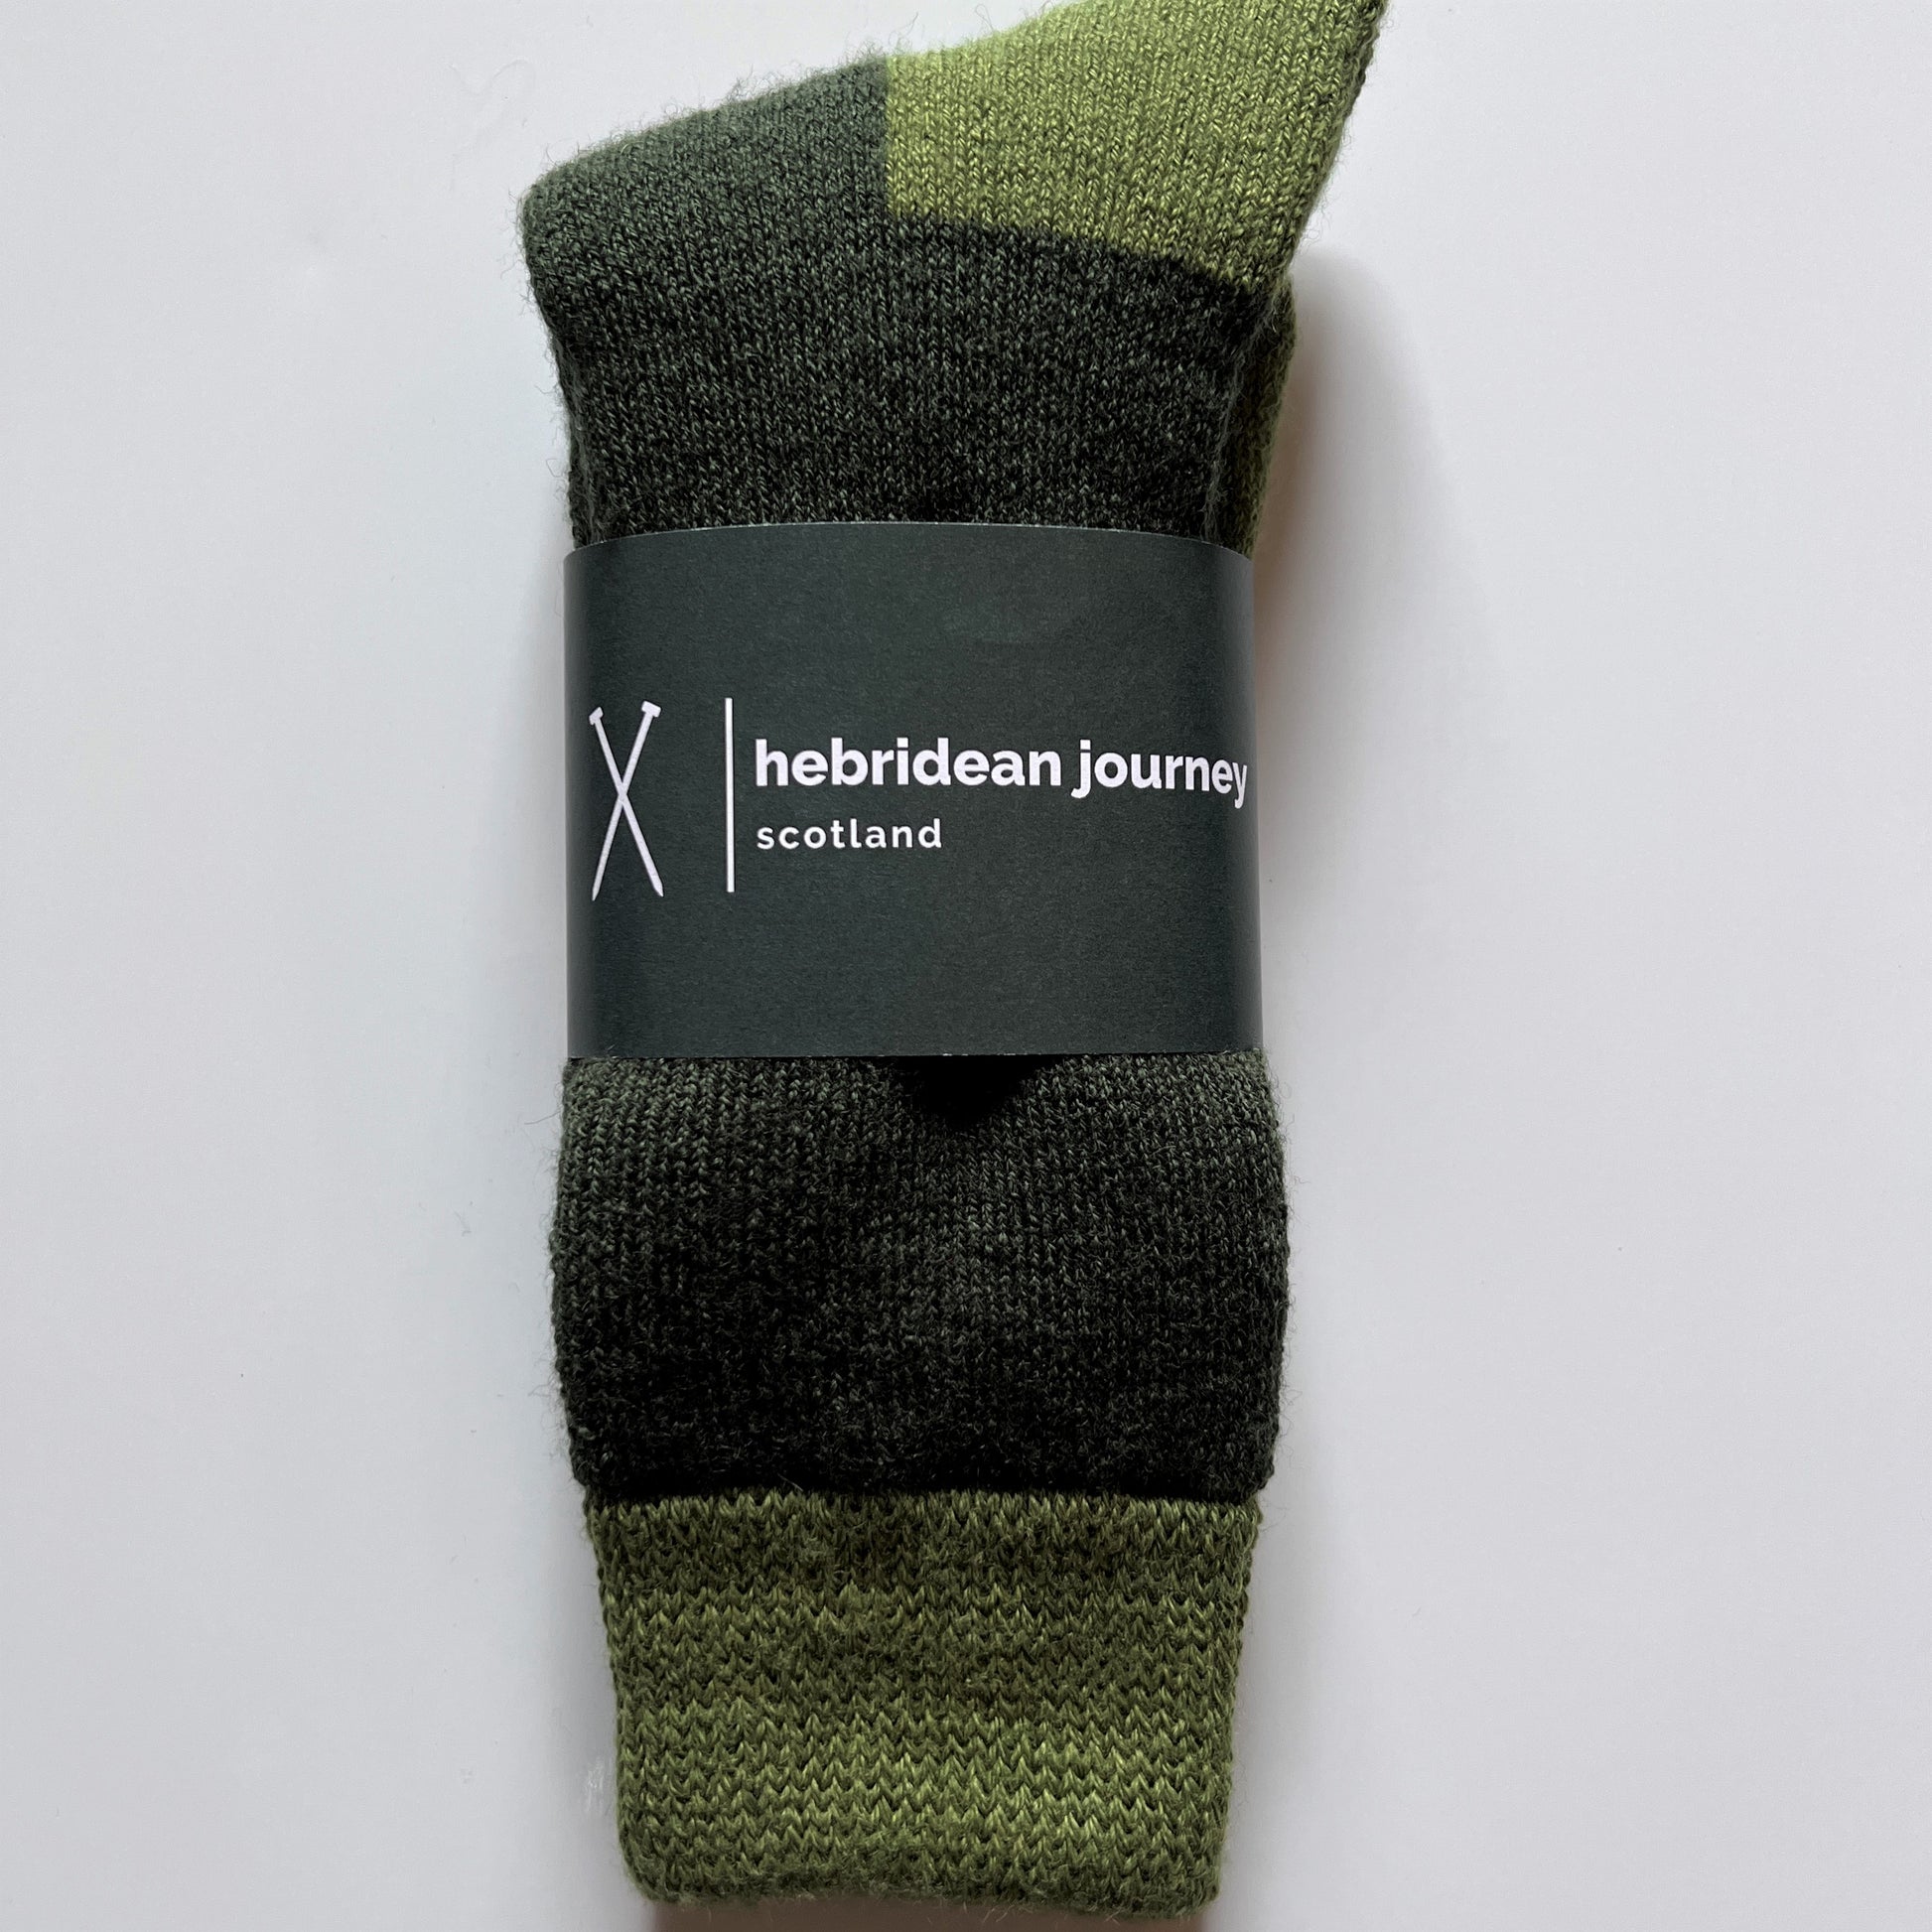 Soft and very warm, these merino wool blend walking socks have a cushioned foot with a soft fit cuff, ribs for ventilation and lycra support at the ankle and instep. Available in two lovely colours Basalt Grey and Kelp Green.